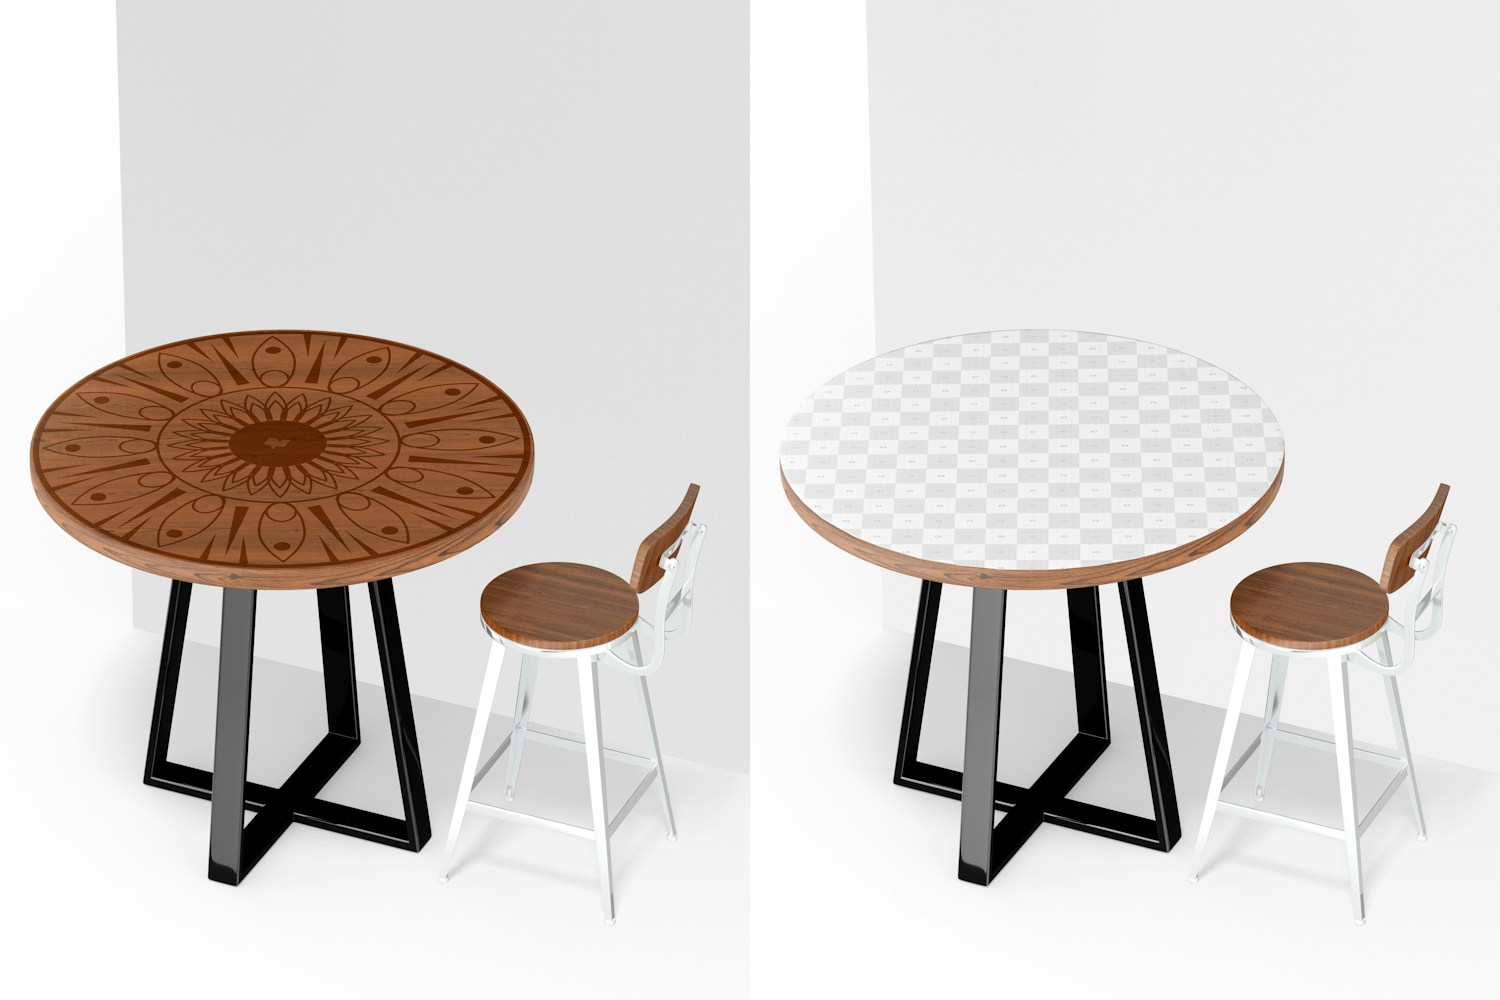 Wooden Round Table Mockup, with Chair